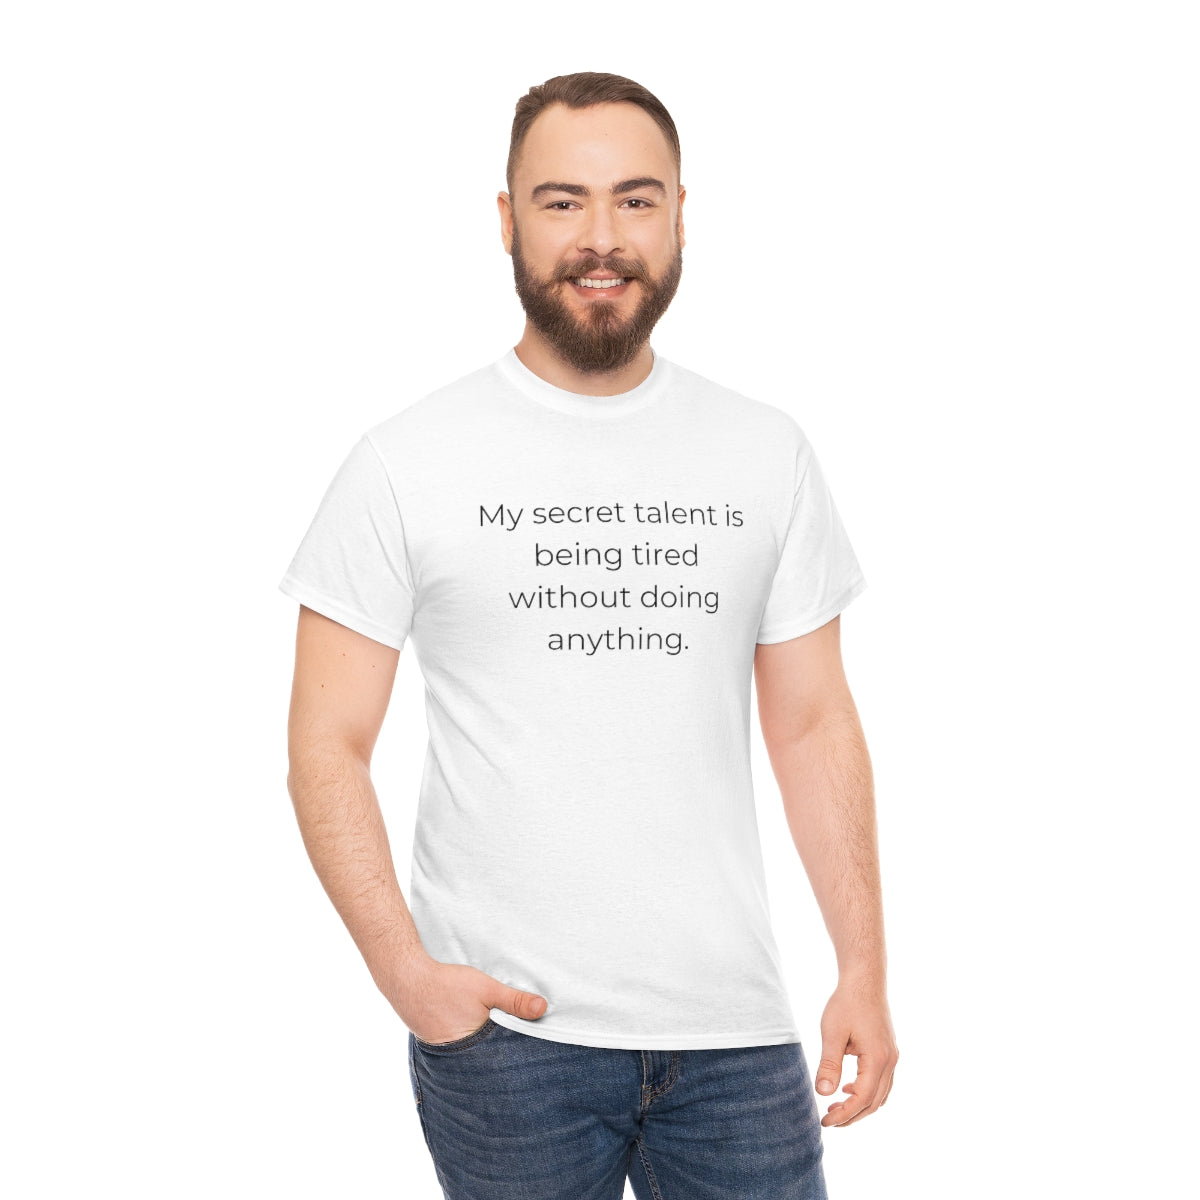 Tired Mom, Chronic Pain, Funny Tshirts, Chronic Pain Shirts, Tired Student Shirt, Tired As A Mother T-Shirt, Tired Shirt, Always Tired - The Good Life Vibe